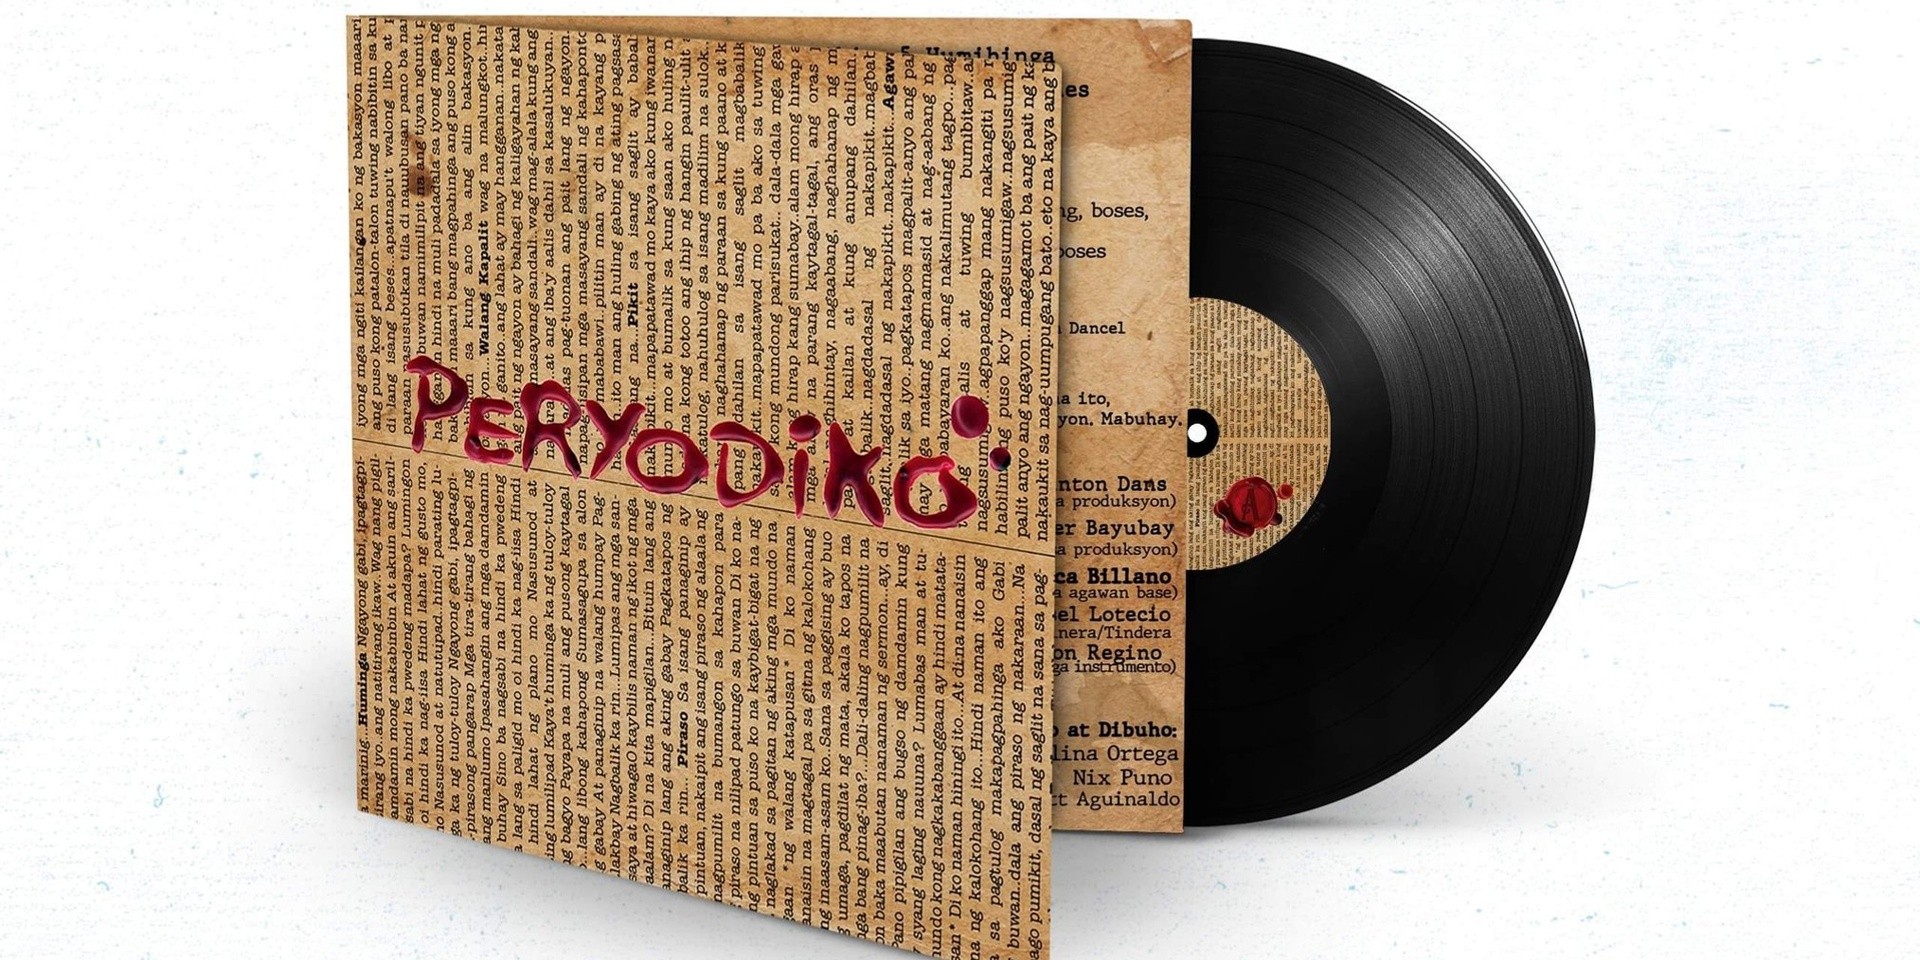 Peryodiko's self-titled debut album is dropping on vinyl for the first time